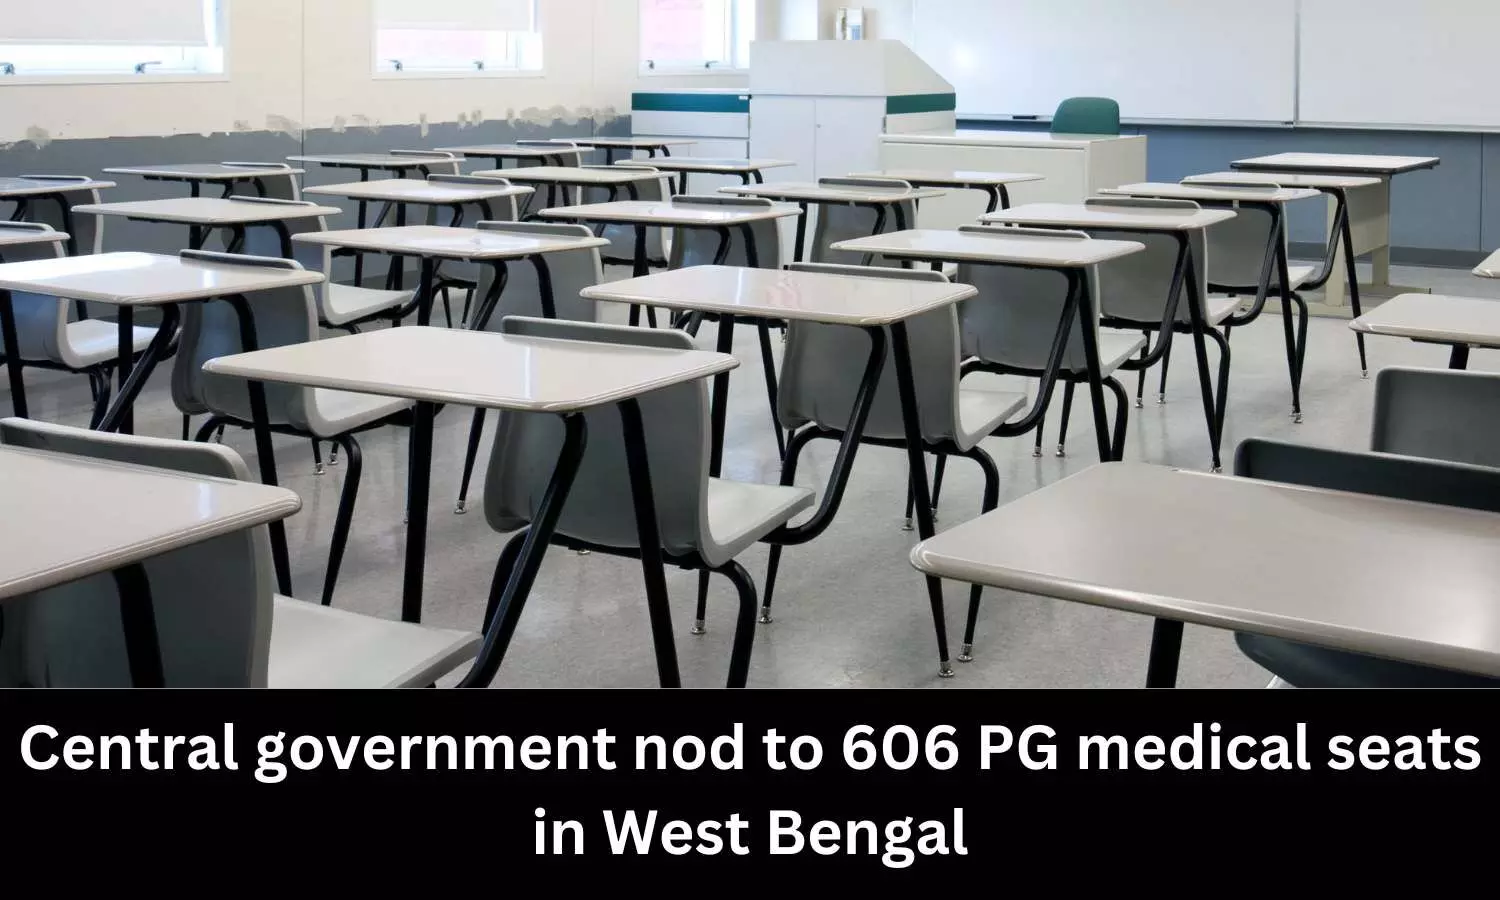 West Bengal gets 606 new PG medical seats